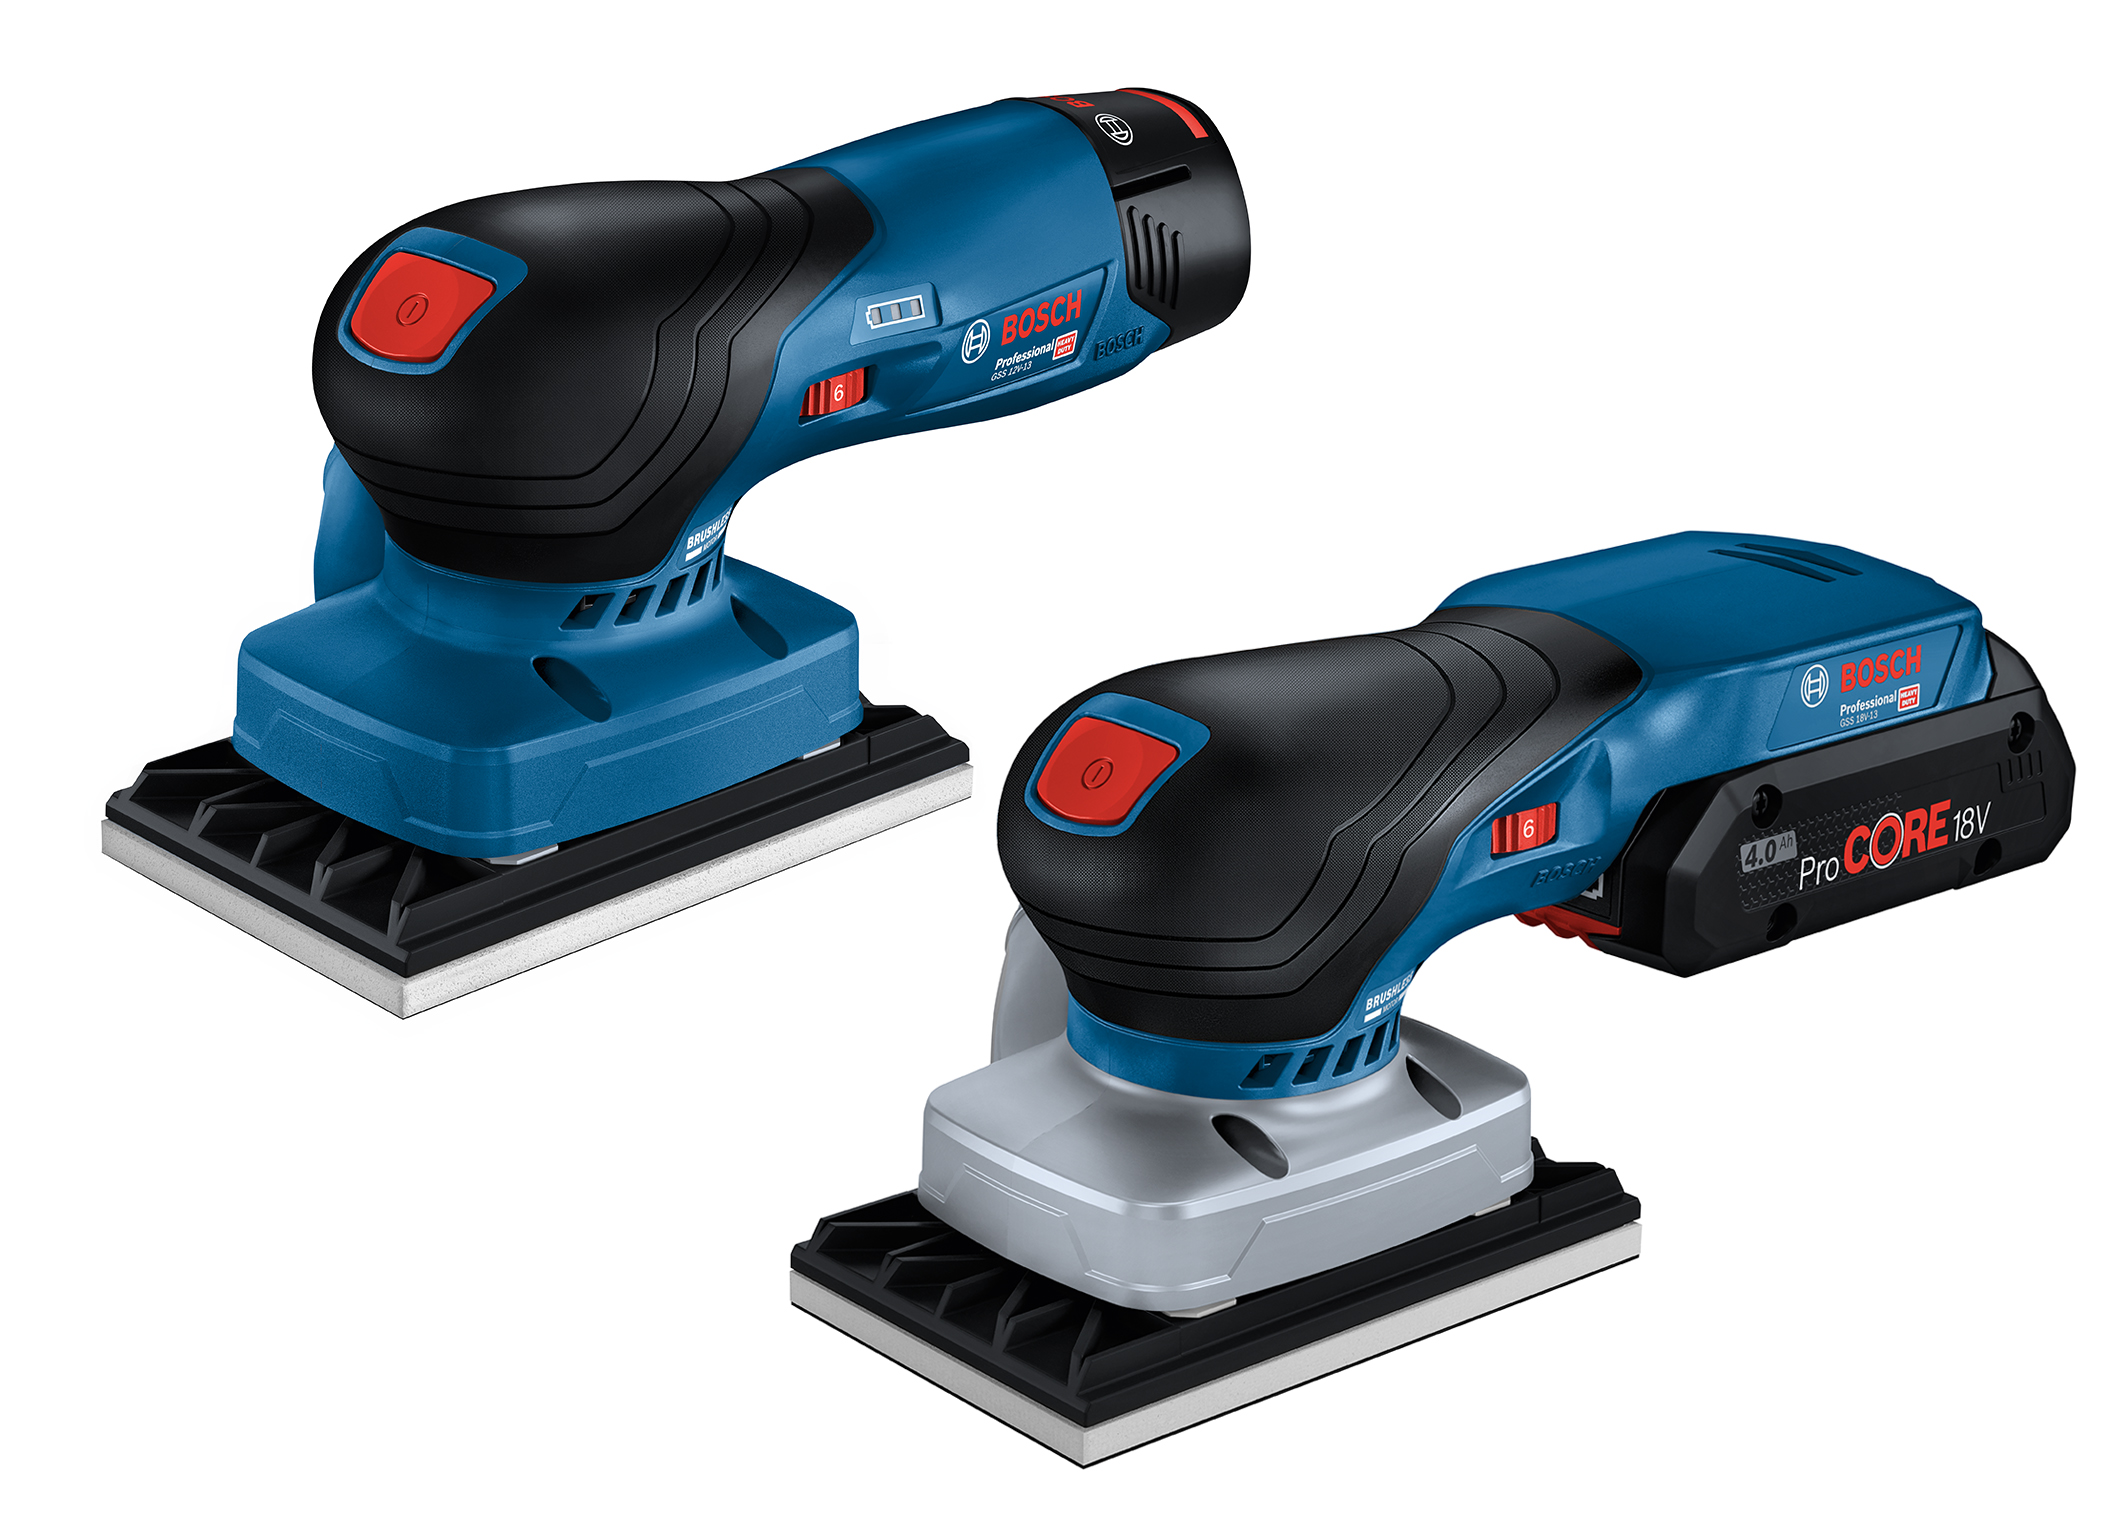 Expansion of 12V and 18V cordless systems: Two new cordless orbital sanders from Bosch for pros